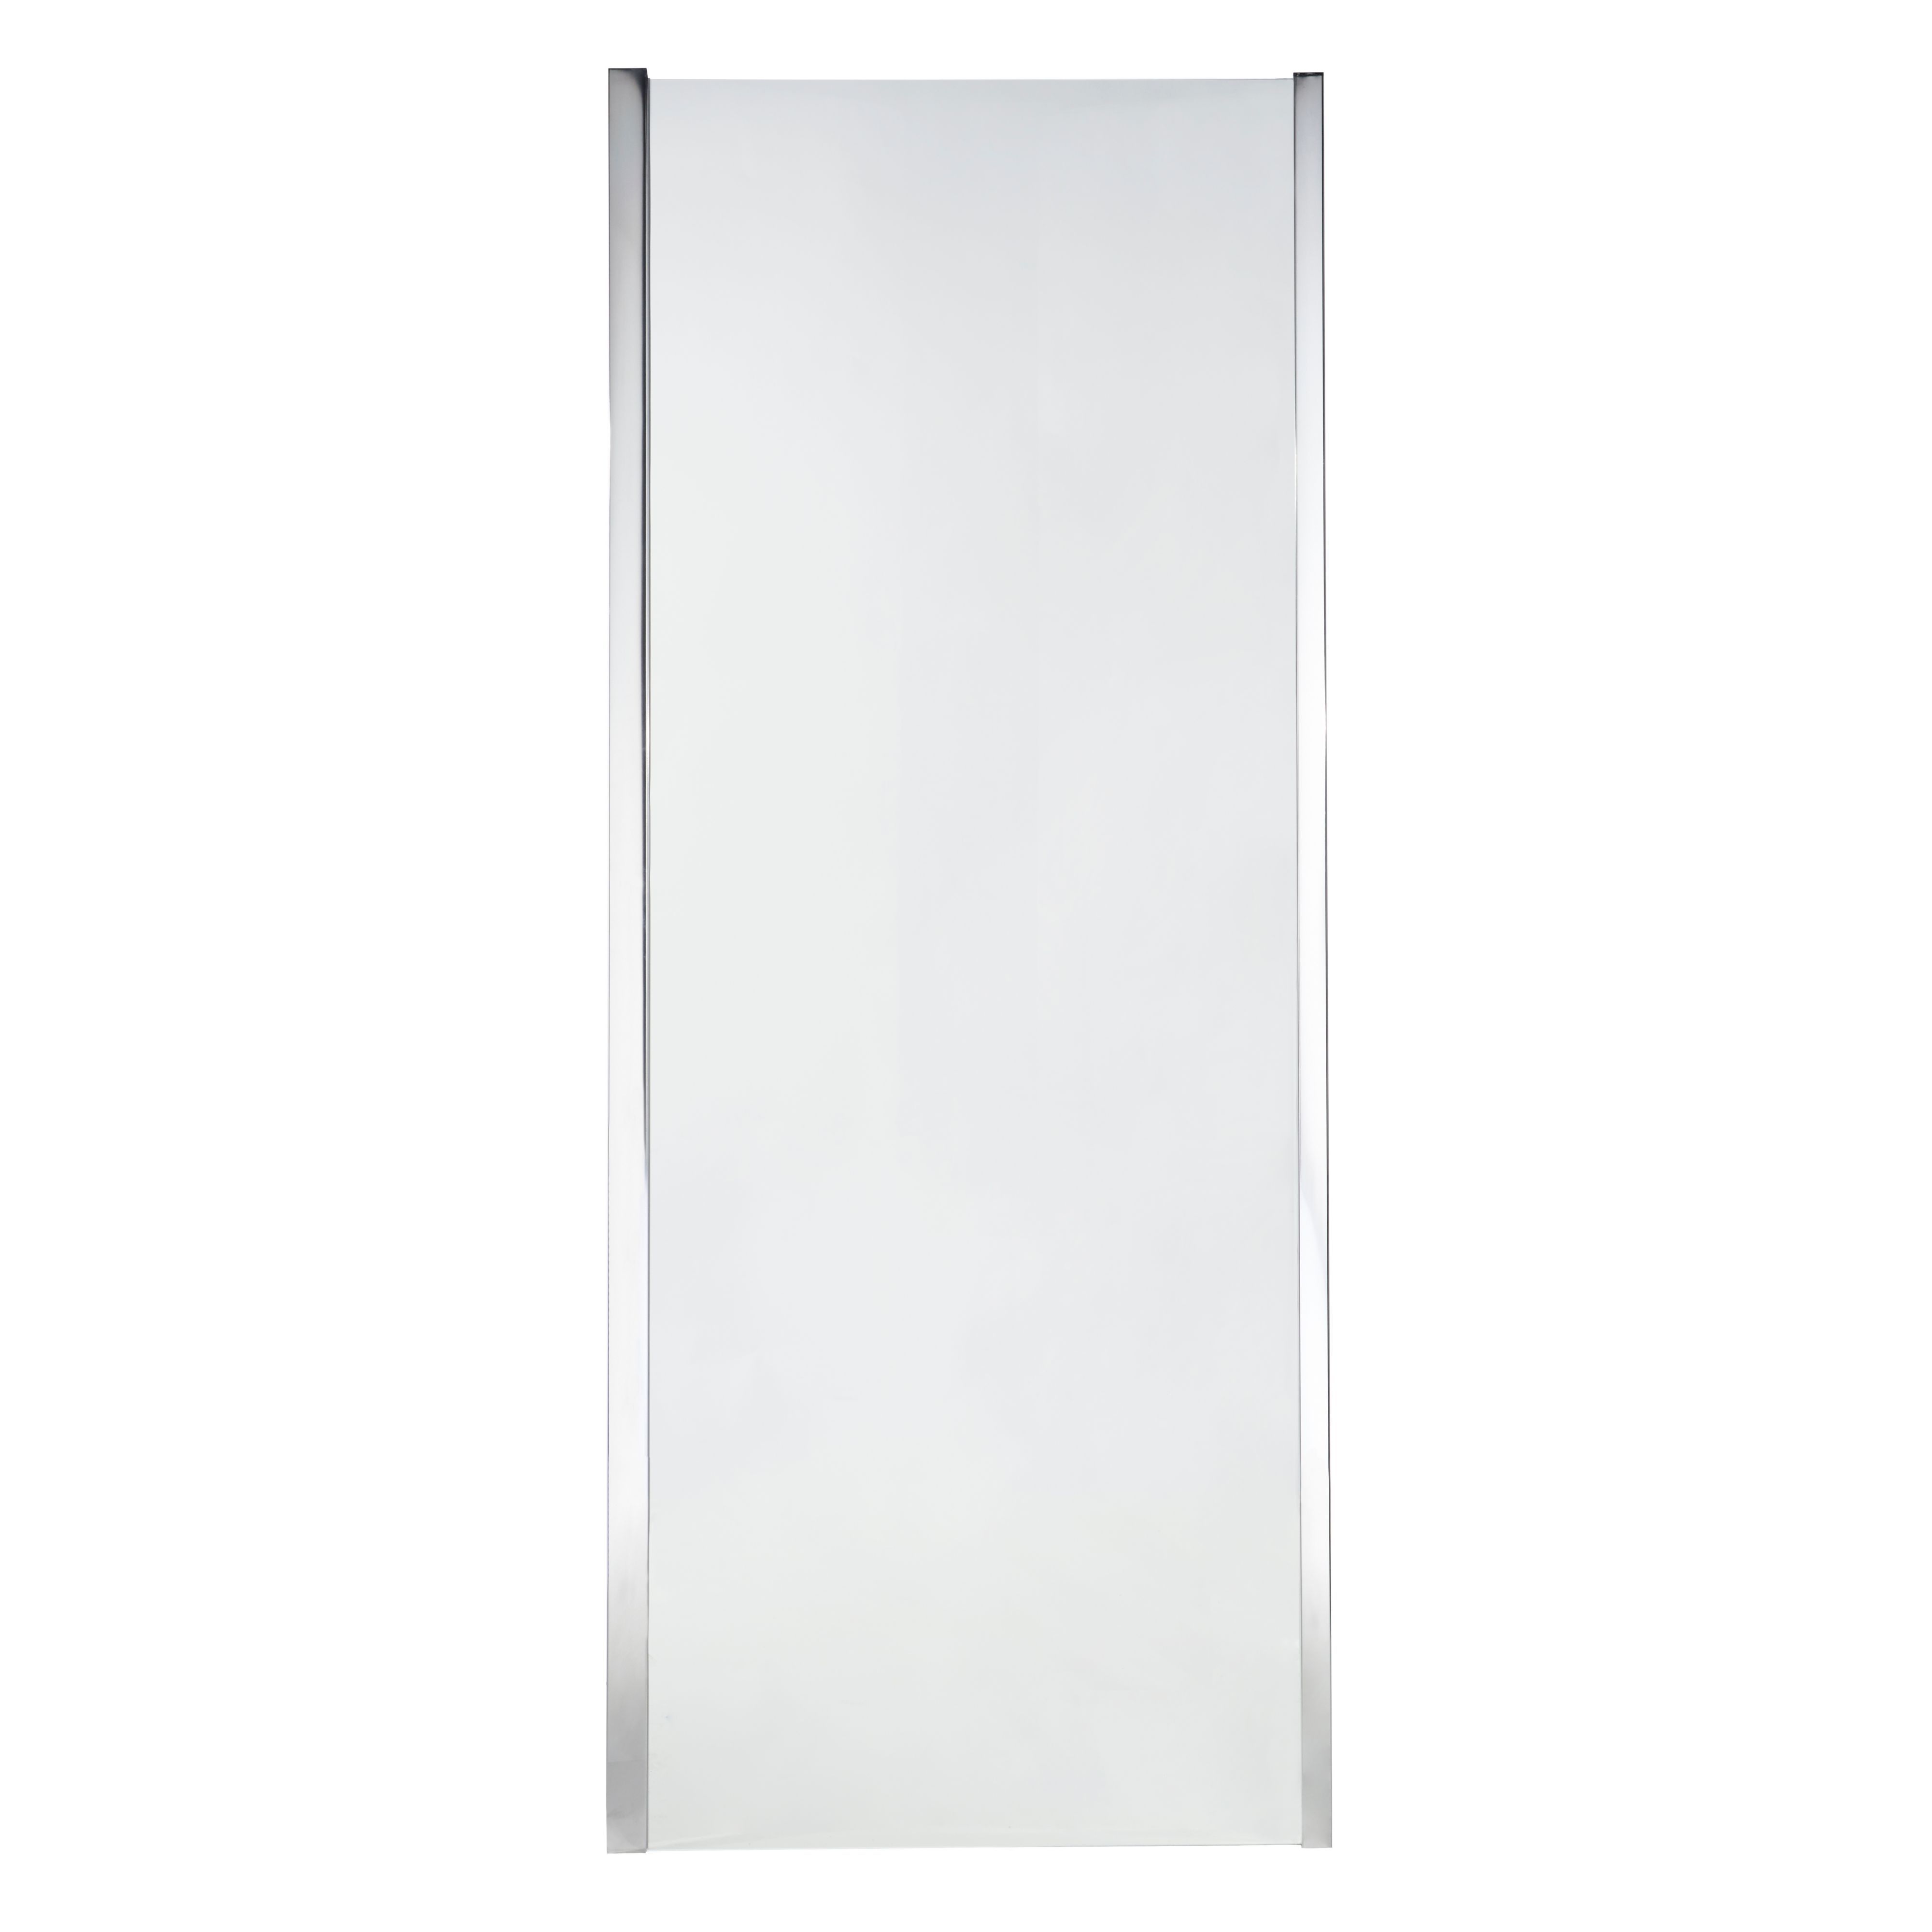 Cooke & Lewis Onega Chrome effect Chrome effect Clear Fixed Shower panel (H)190cm (W)80cm